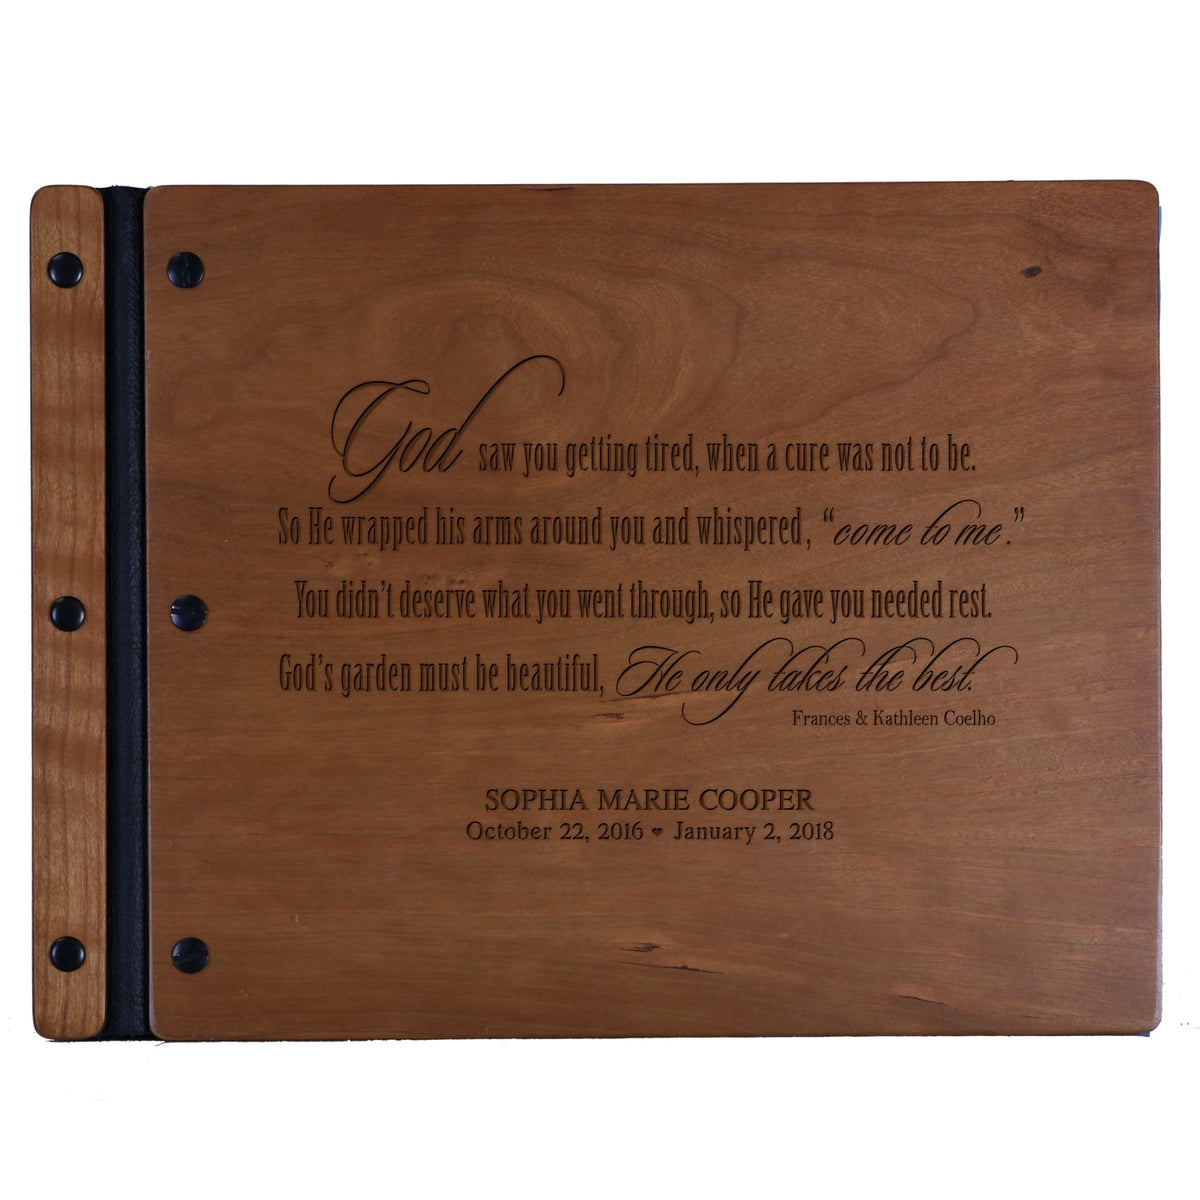 Personalized Memorial Guest Book - God Saw You - LifeSong Milestones